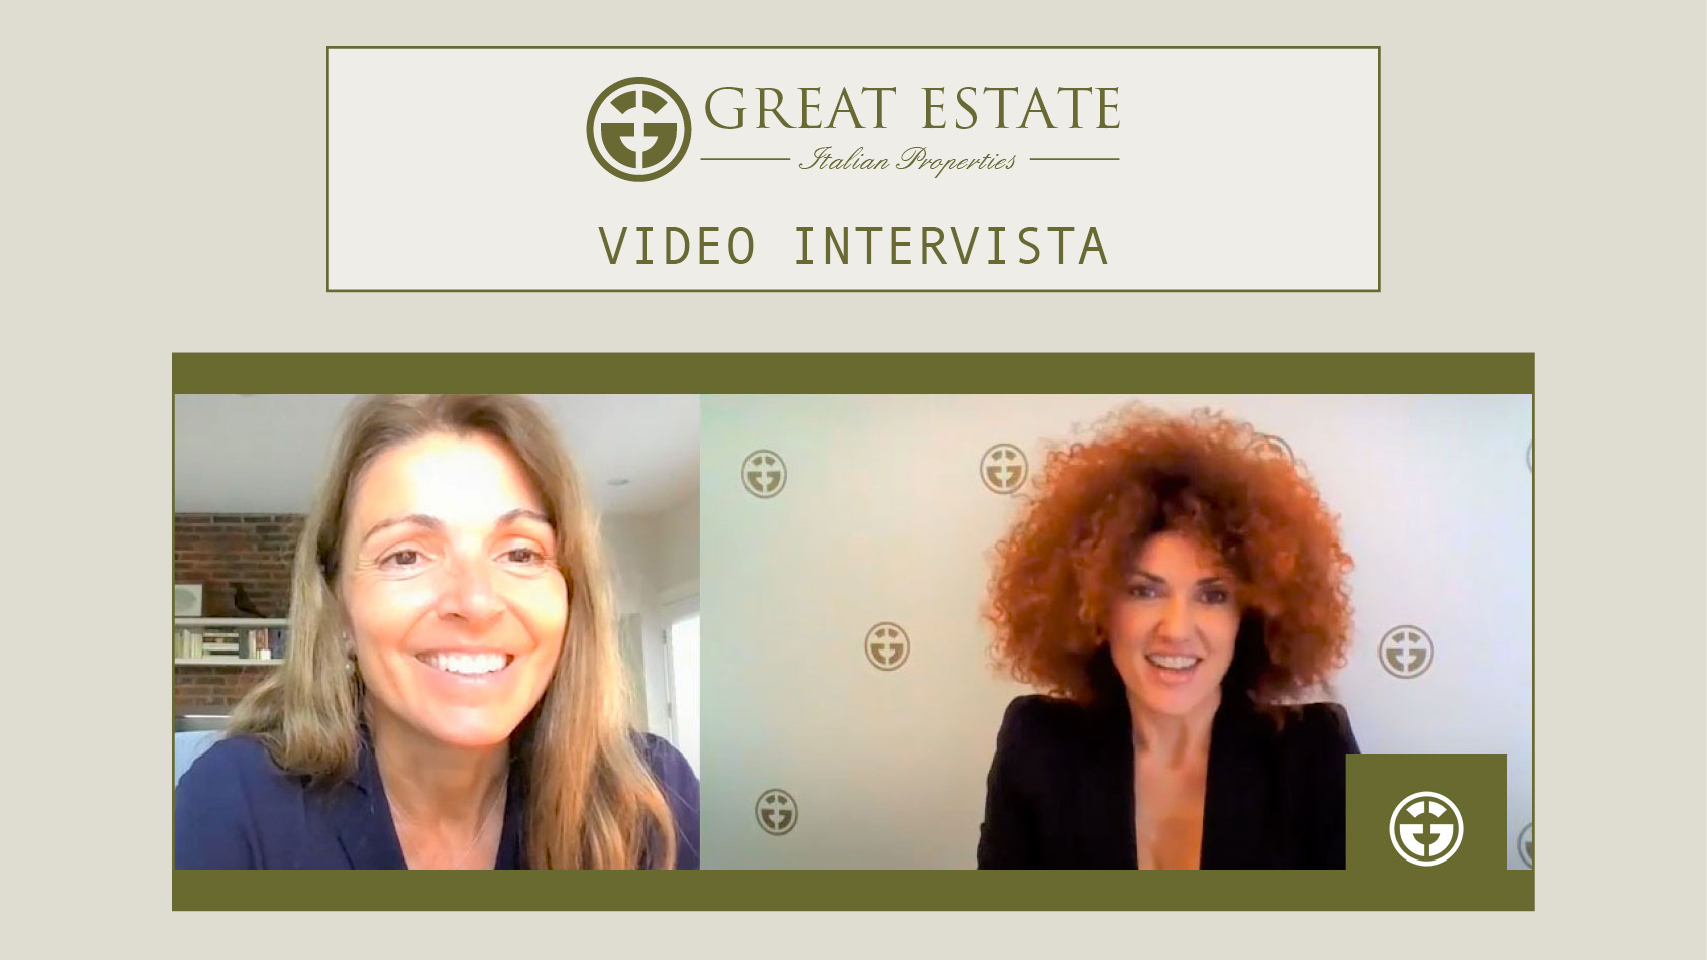 Annalisa Fedelino: “My experience with Great Estate? The best of the best!”